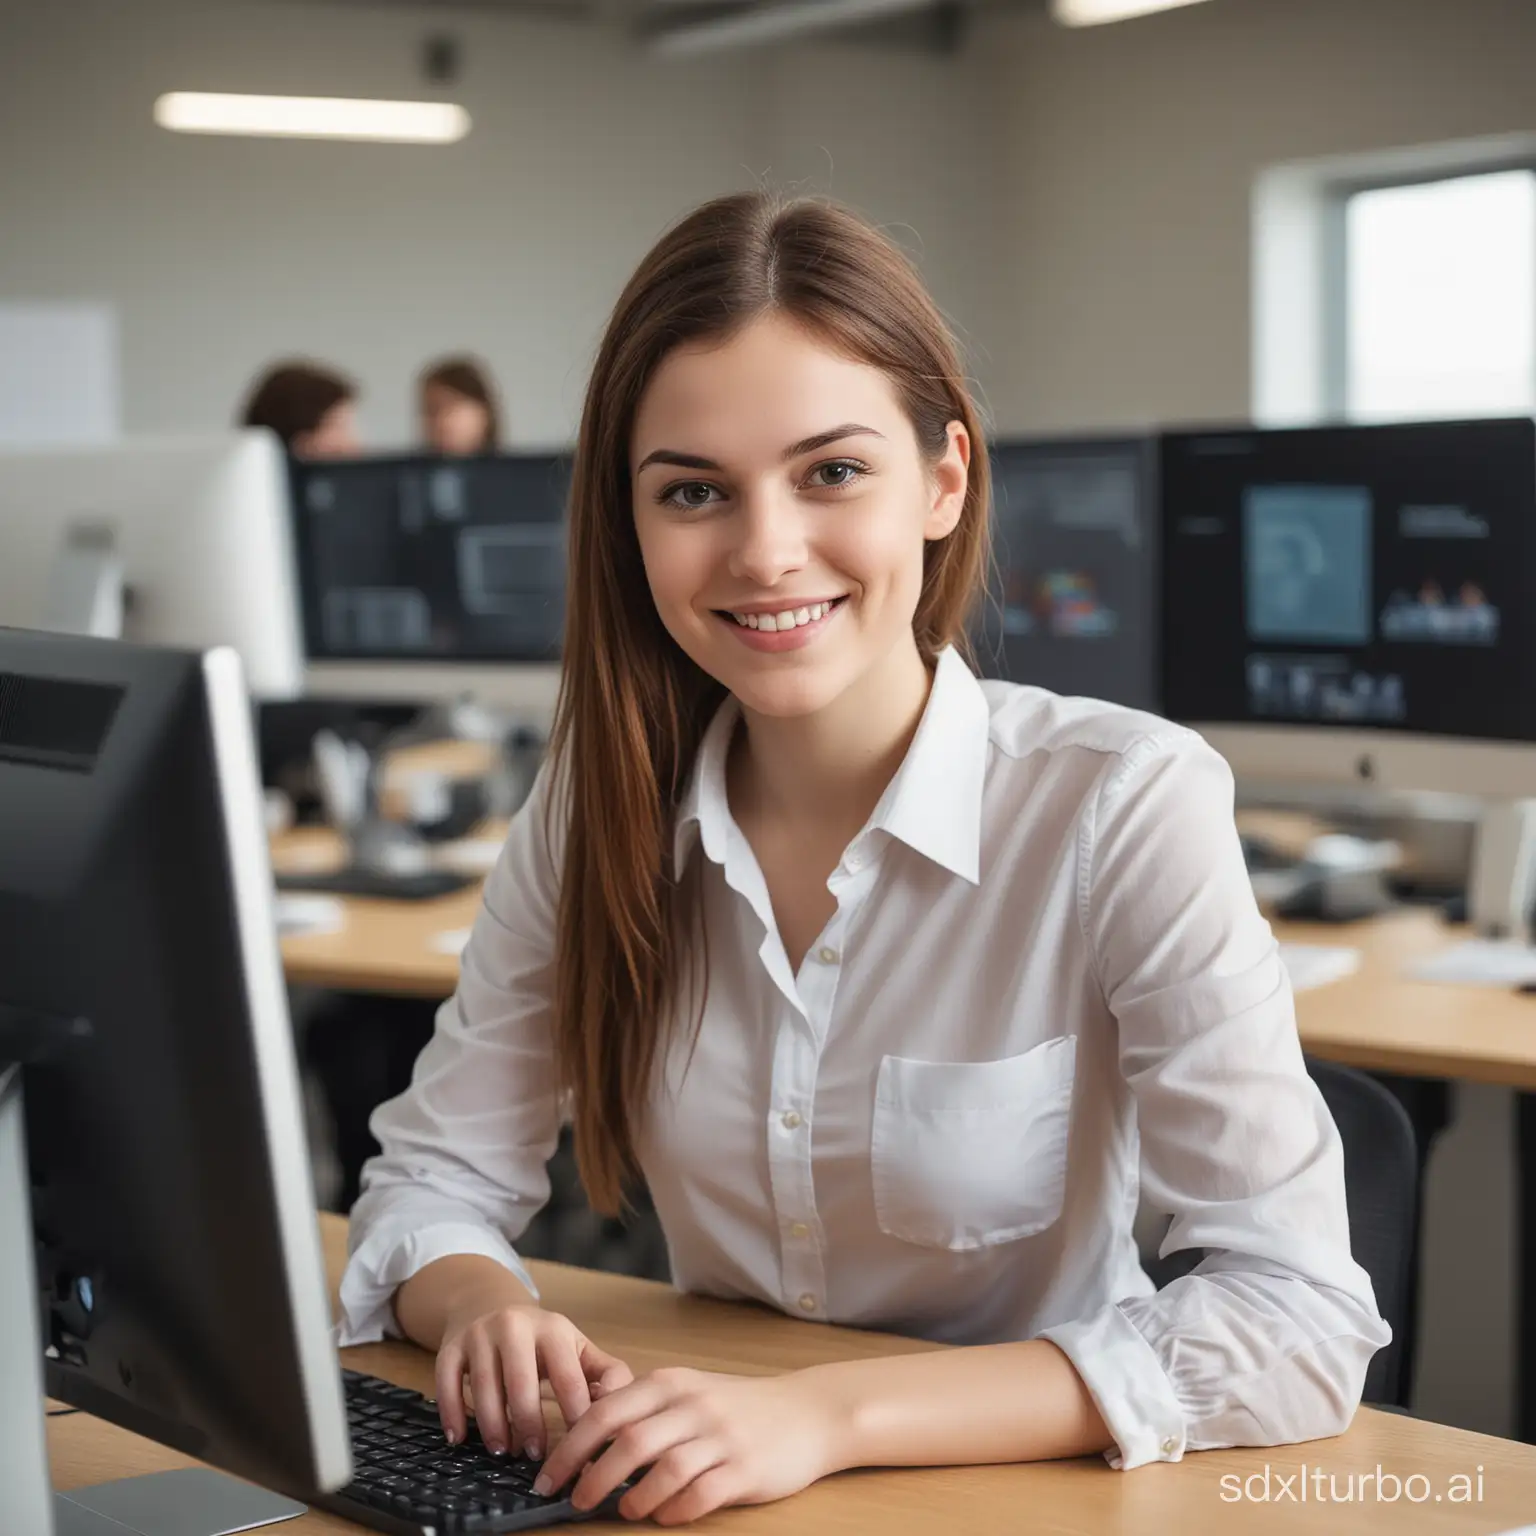 Generate a picture of a young woman with autism, dressed as a graphic designer and working on a computer in an office. She is smiling and focusing on a project, and in the background you can see other office workers, computers, and desks. The picture should have a dynamic character, and the atmosphere should resemble a professional photo session. The woman should not have an idealized, perfect look.